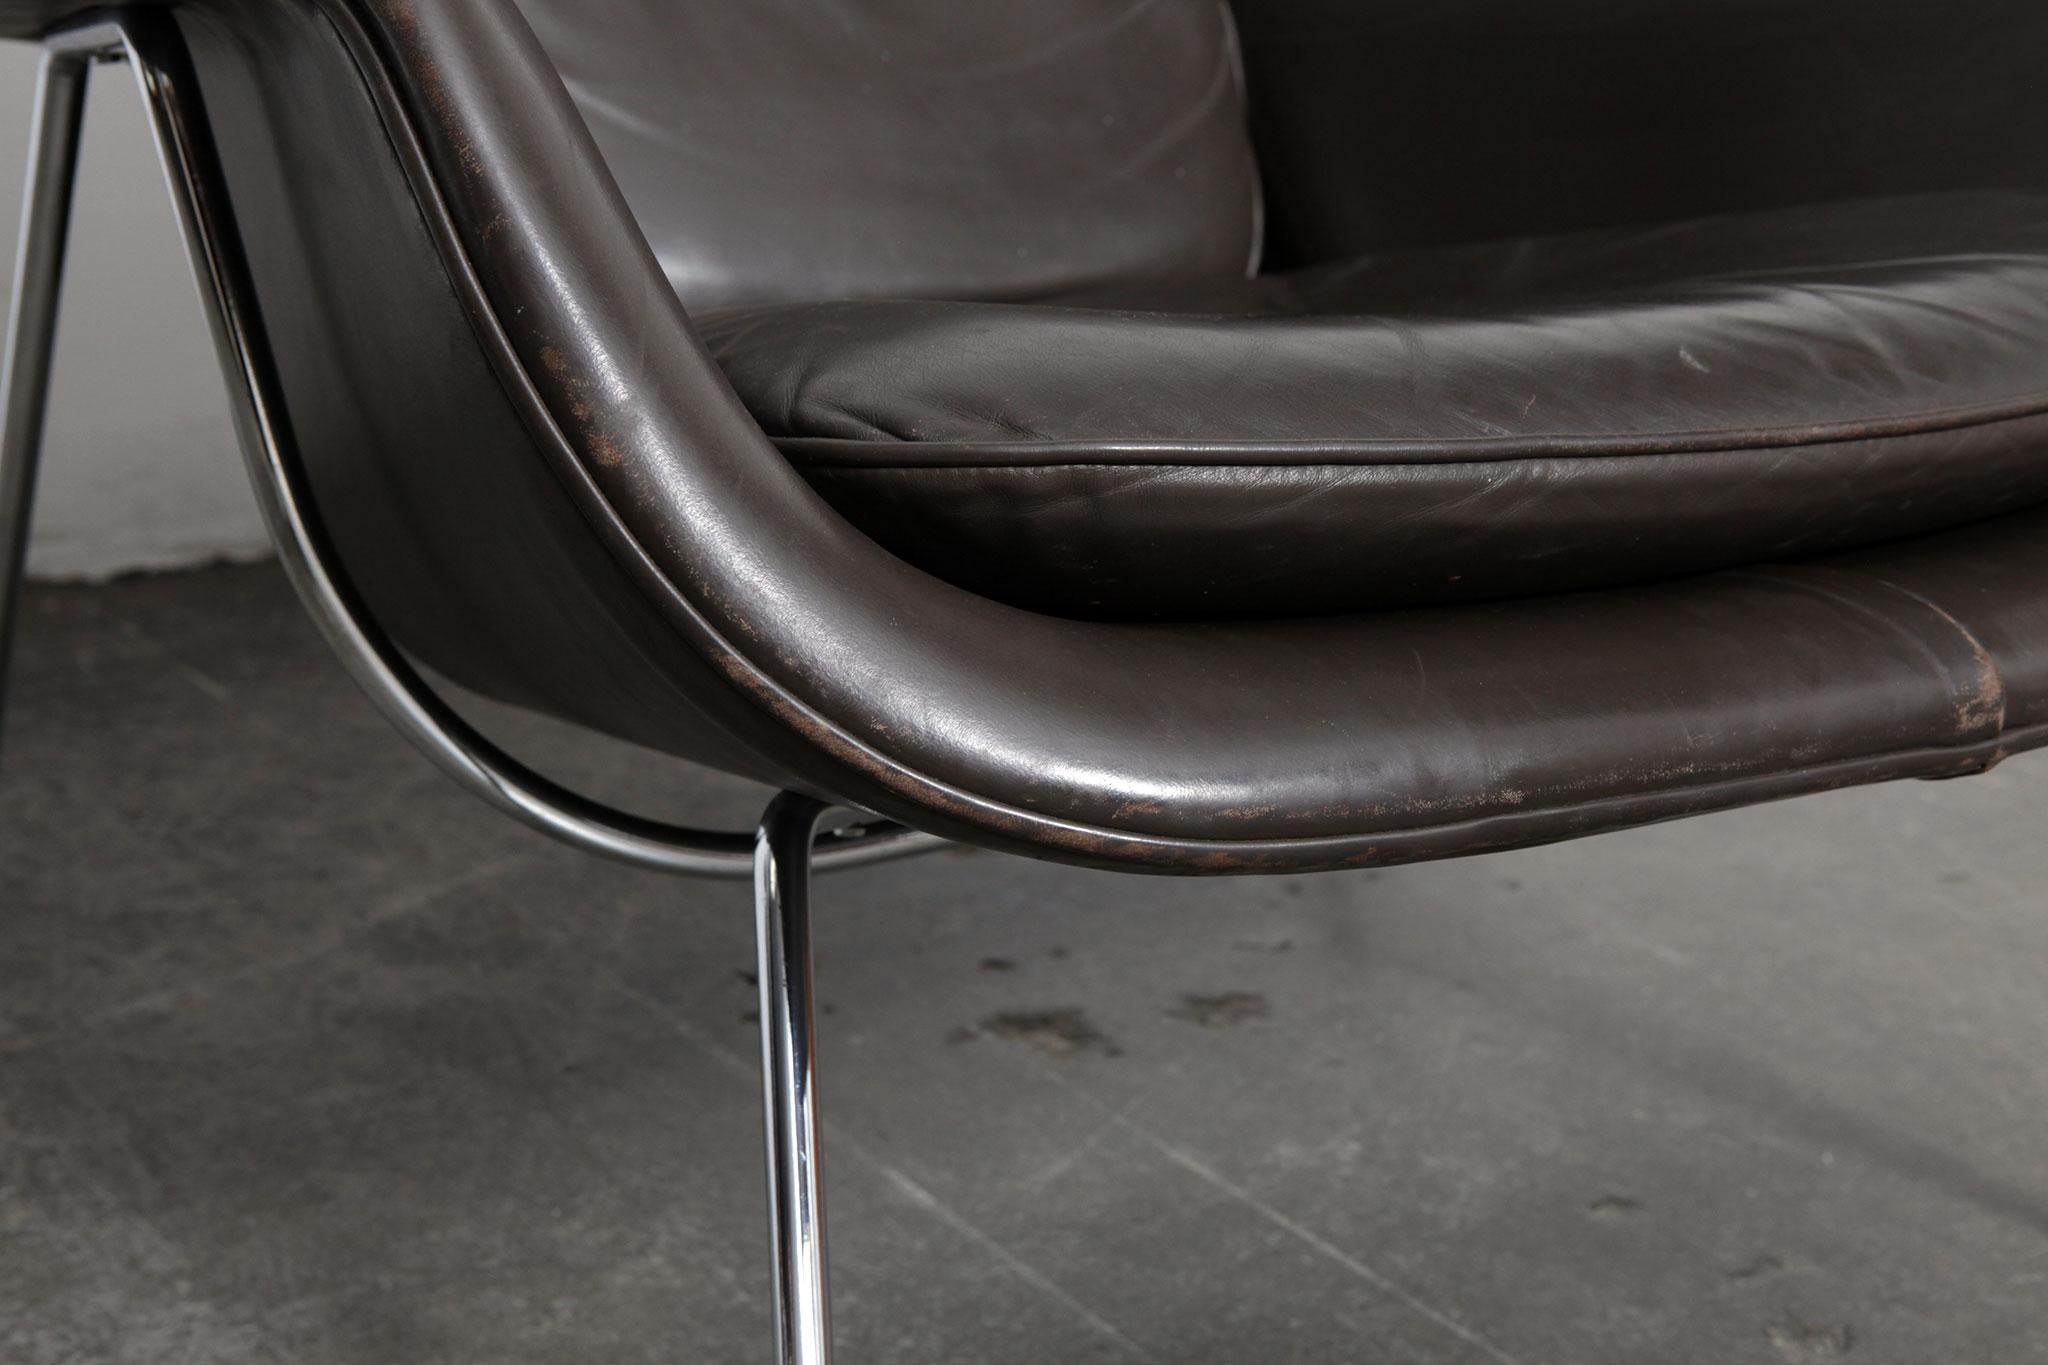 Original Leather 'Womb' Chair by Eero Saarinen for Knoll 1